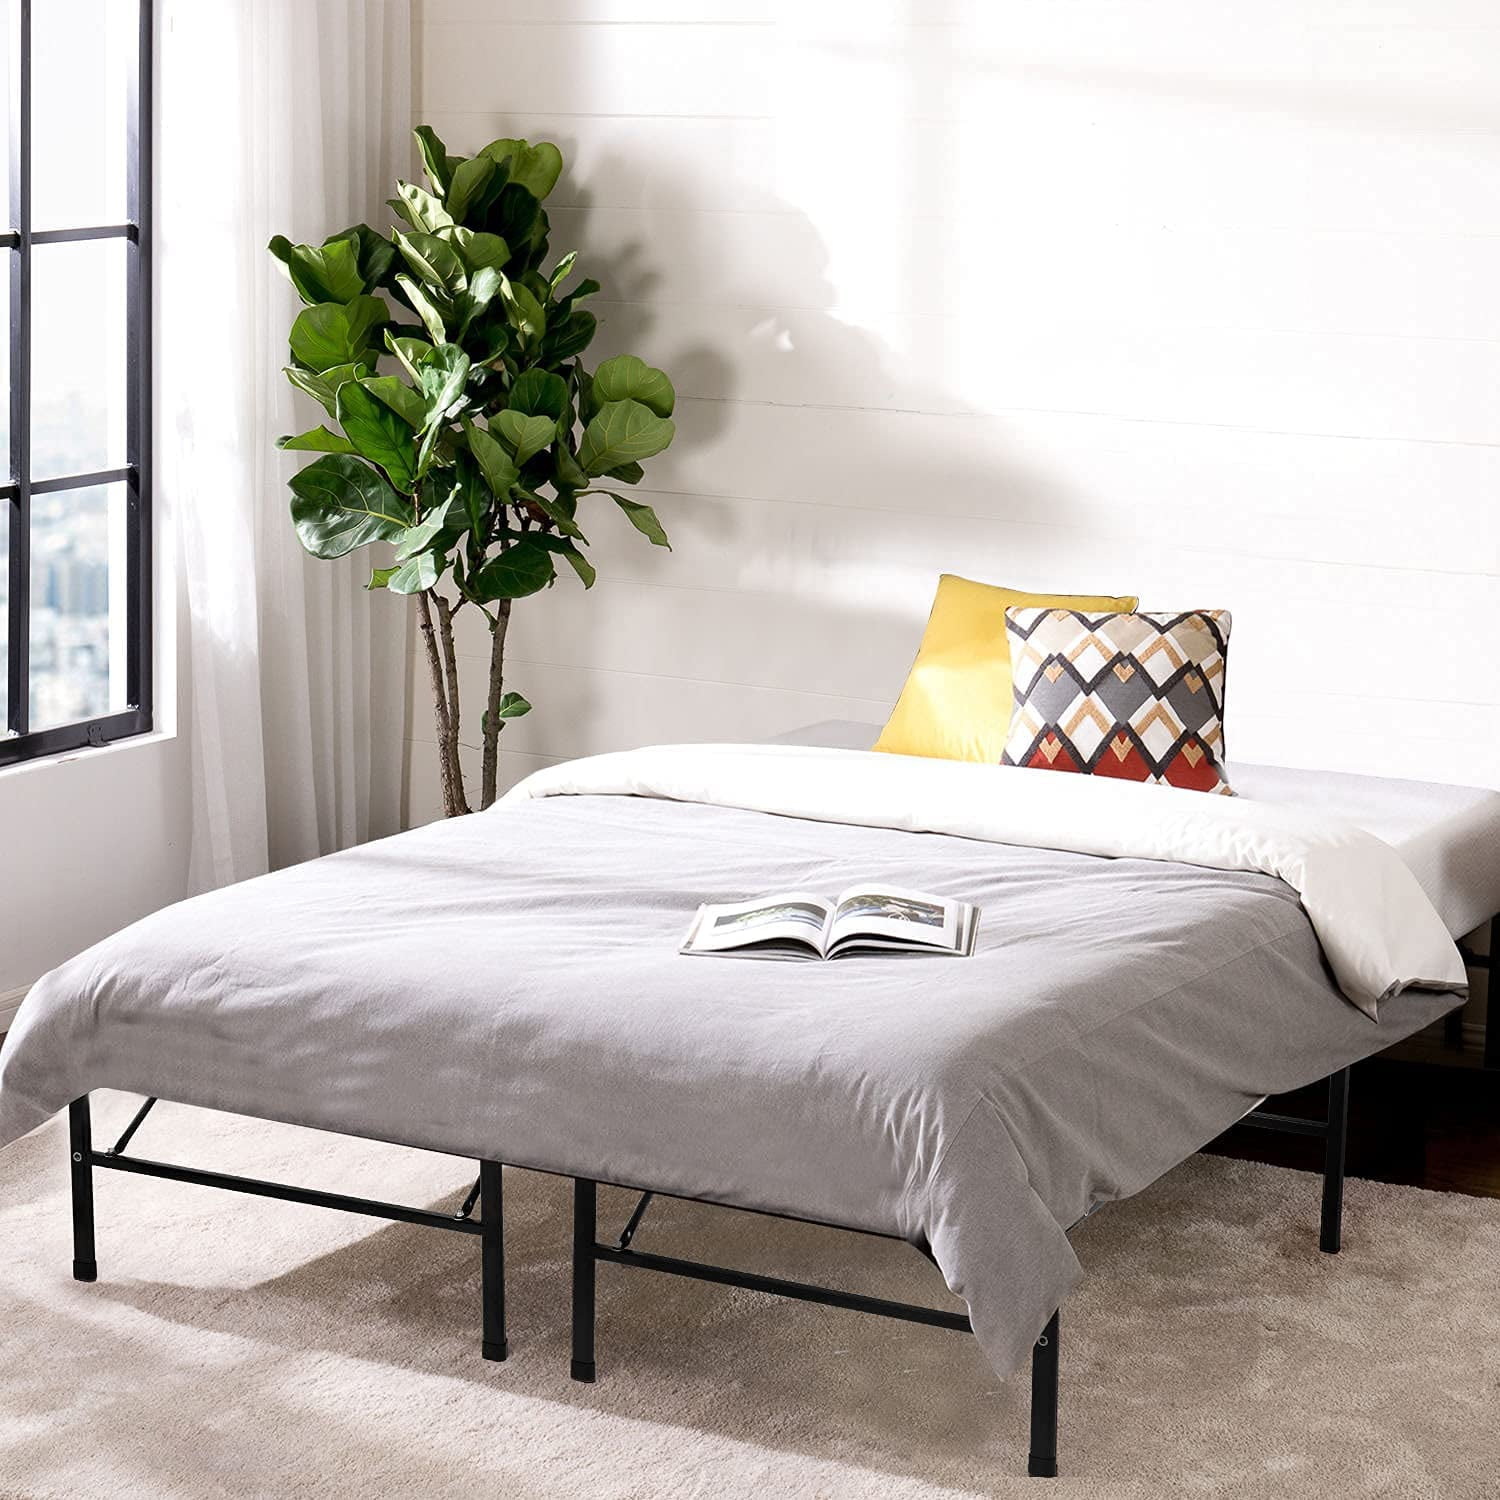 Platform Bed Frame Queen Metal Base, Do All Bed Frames Require A Box Spring